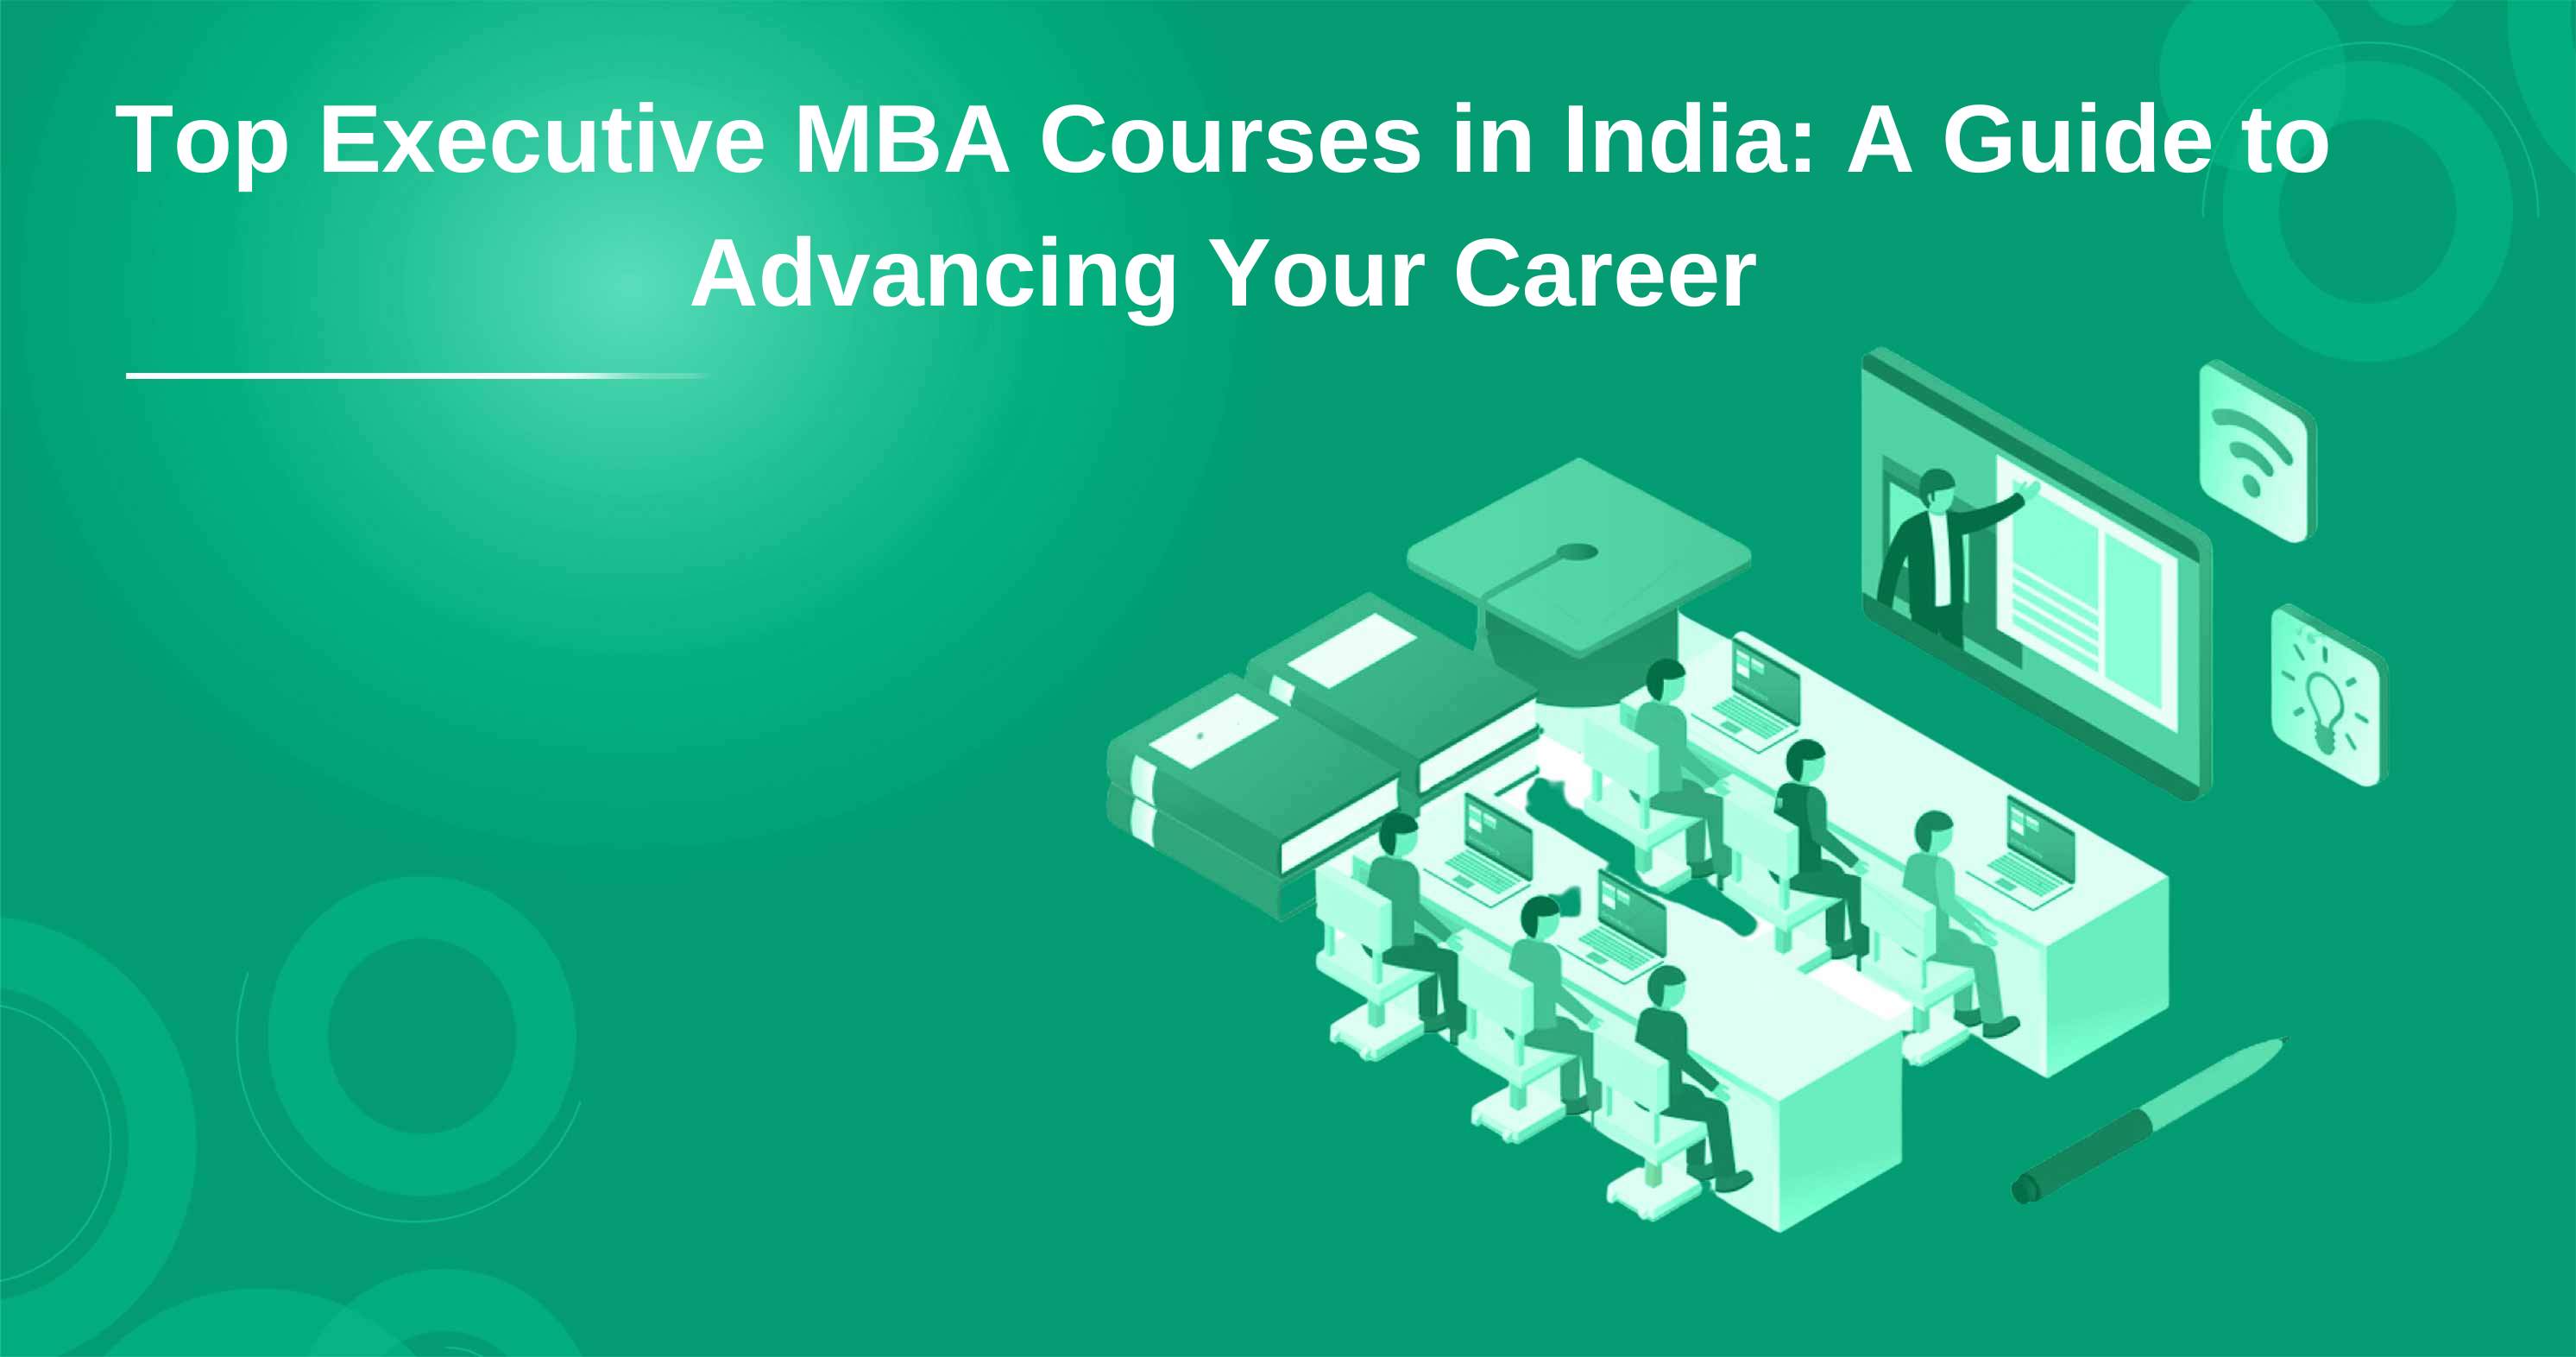 Top Executive MBA Courses in India: A Guide to Advancing Your Career